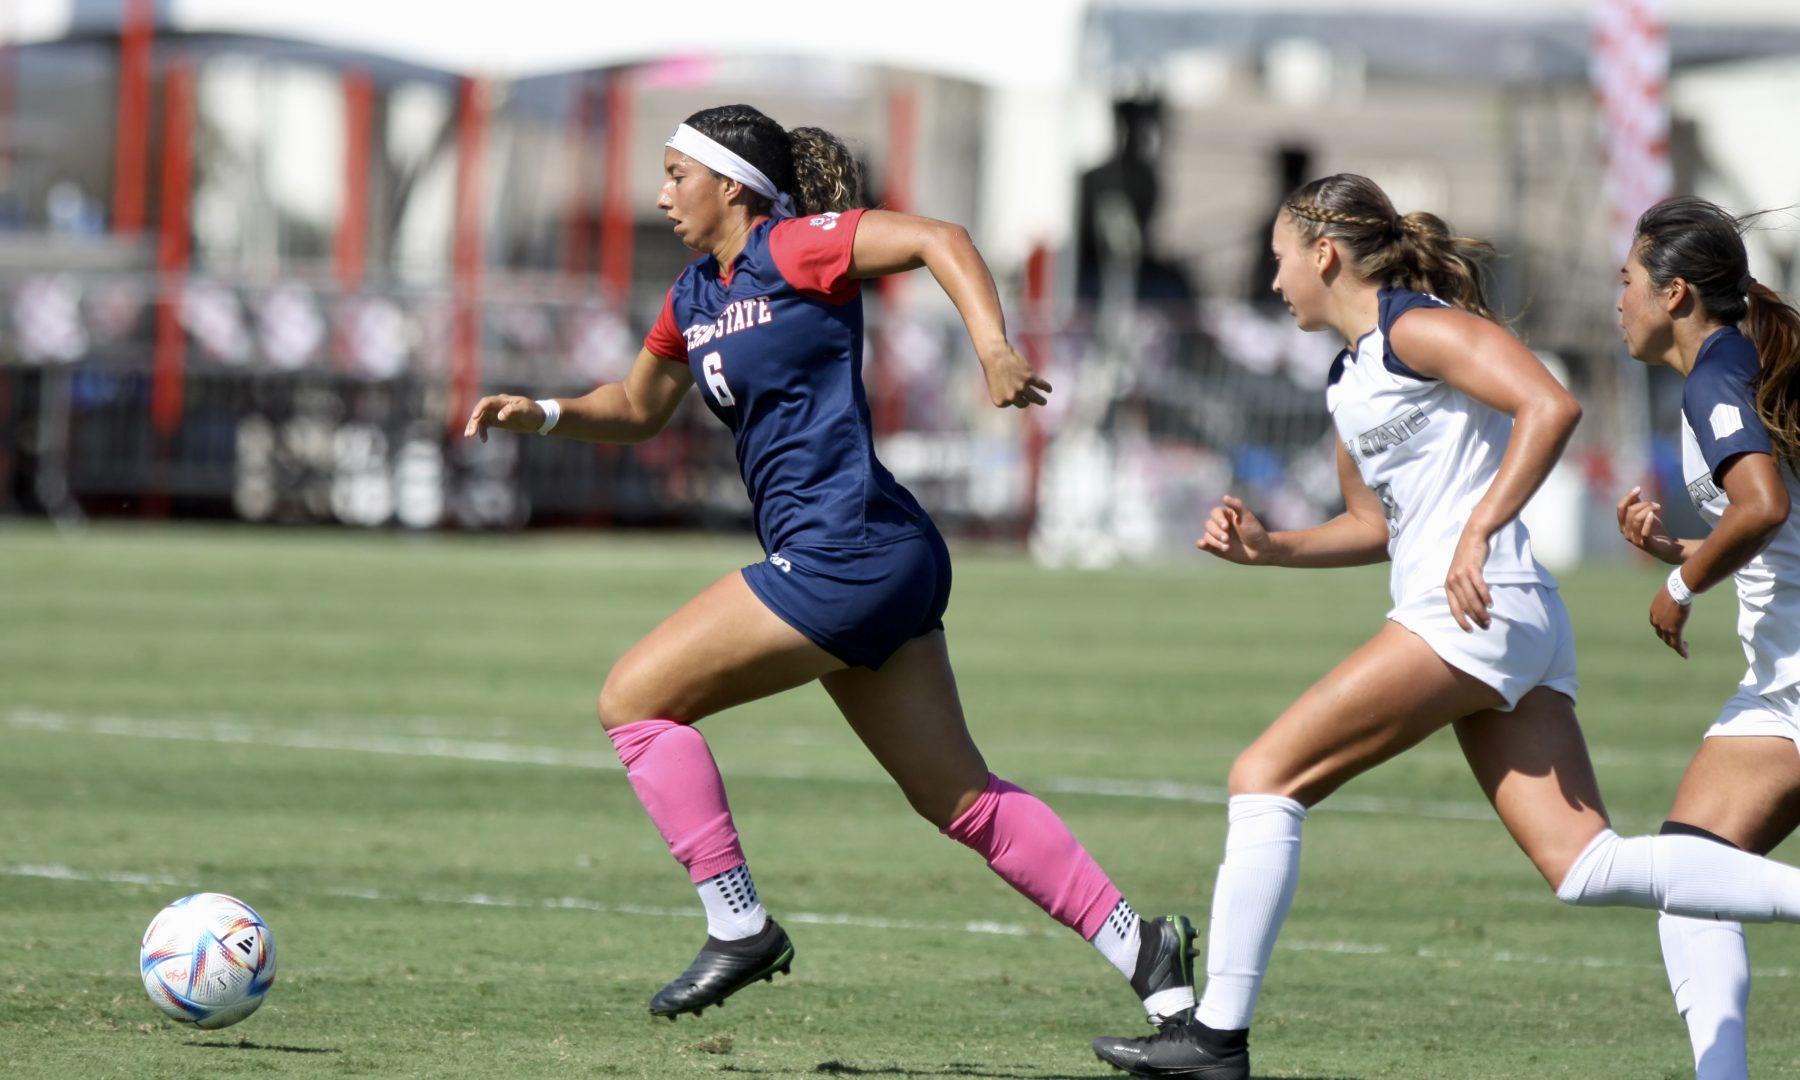 Kassandra Ceja (6) dribbles the ball down the field, looking to pass the ball to a teammate against Utah State. (Aidan Garaygordobil/ The Collegian)